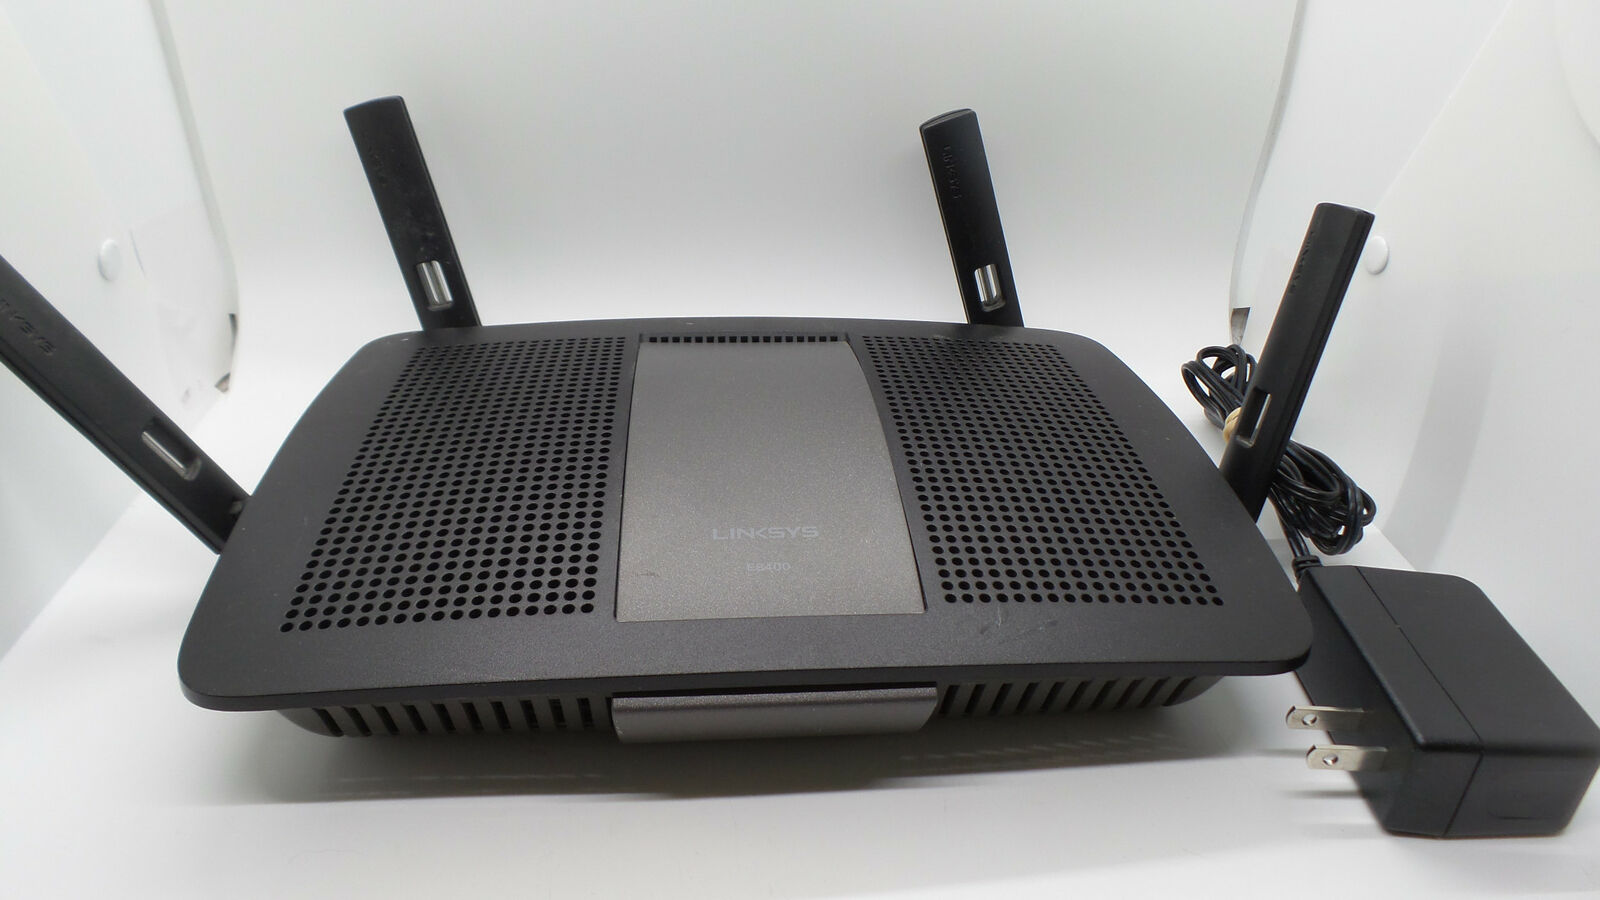 Linksys E8400 AC2400 Dual-Band WiFi Router 1733 Mbps